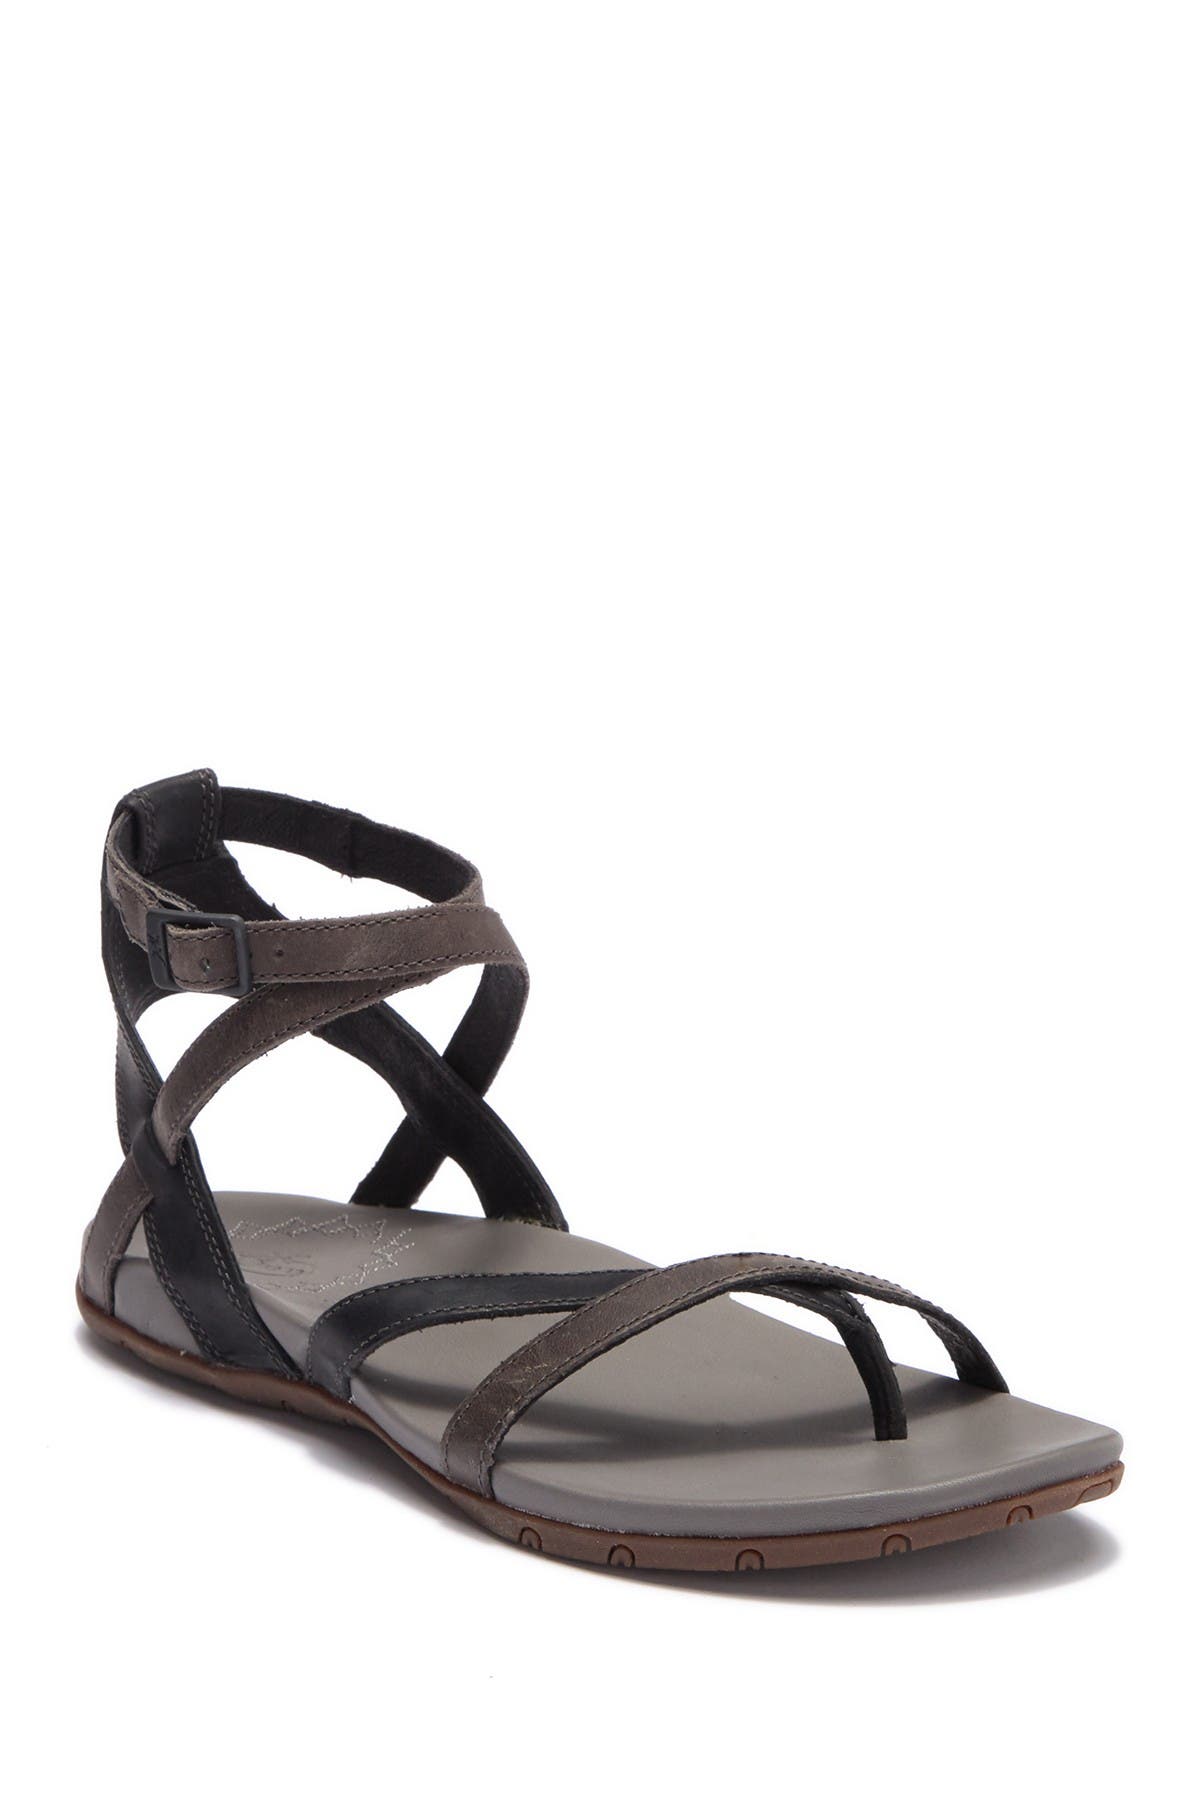 leather chaco